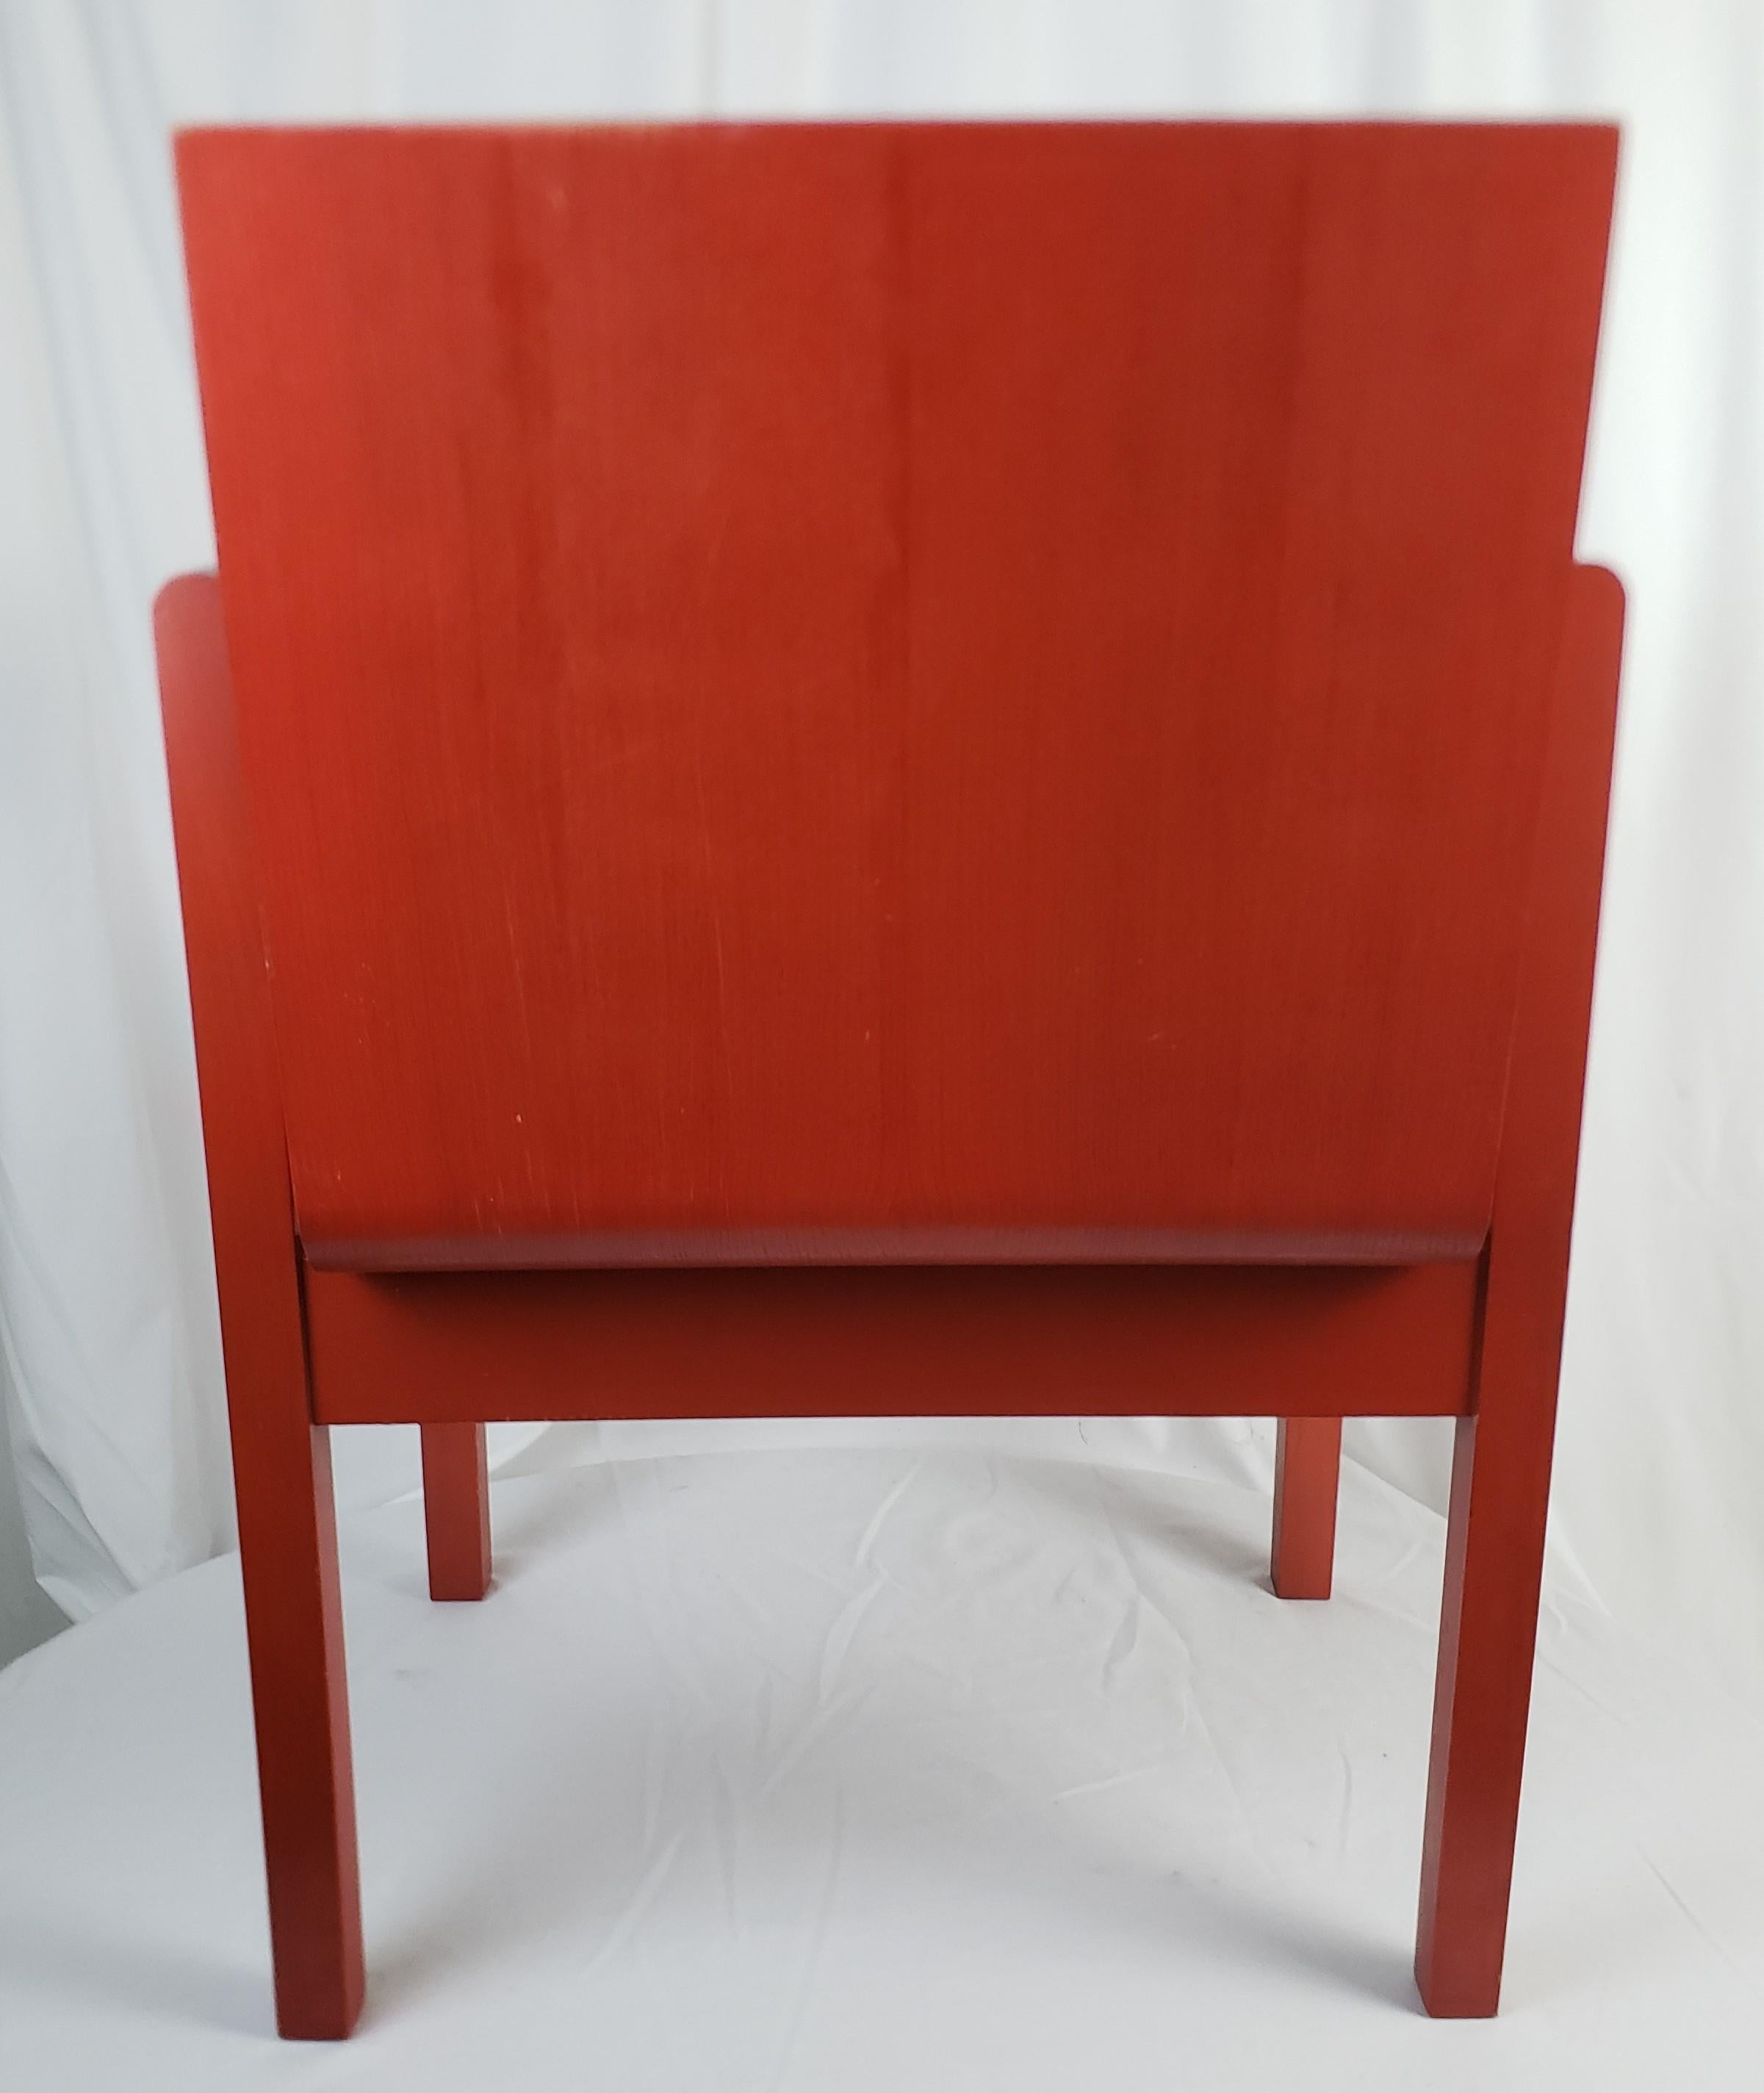 Mid-Century Modern Mid-Century Investiture Chair Designed by Lord Snowden for Prince Charles 1969 For Sale